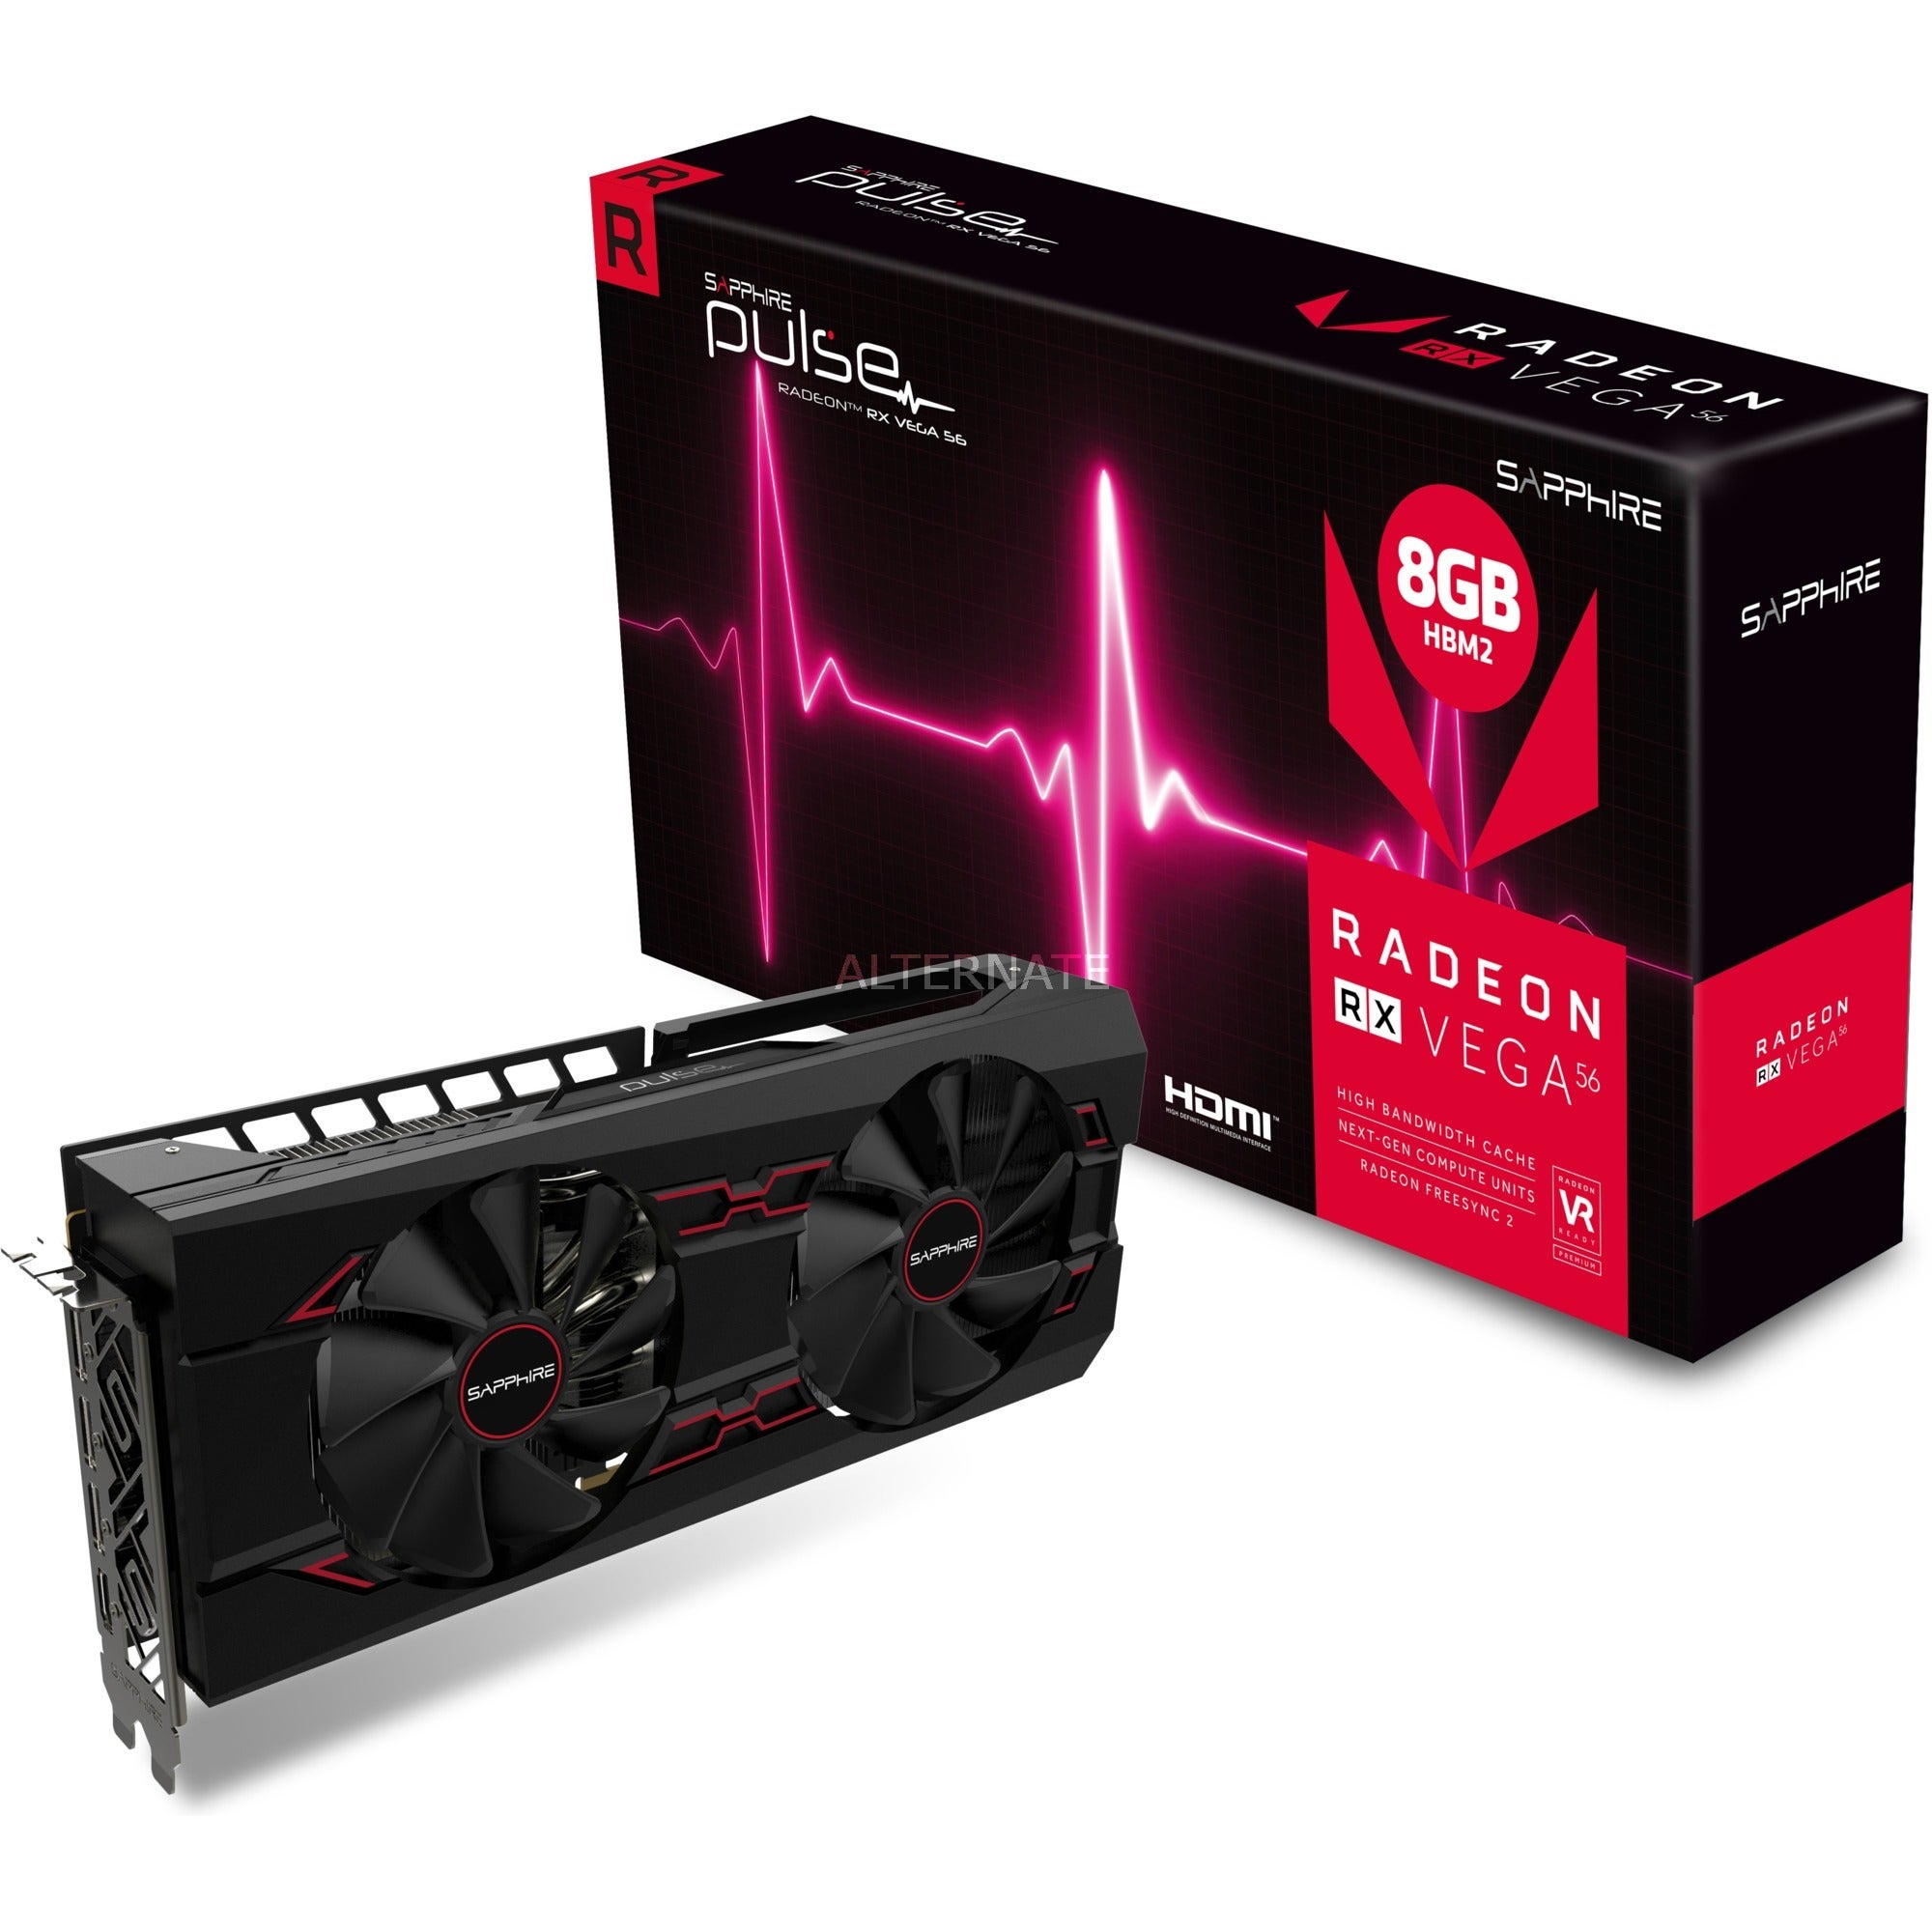 Image for Grab an 8GB Radeon RX Vega 56 with Resident Evil 2, Devil May Cry 5 and The Division 2 for £300